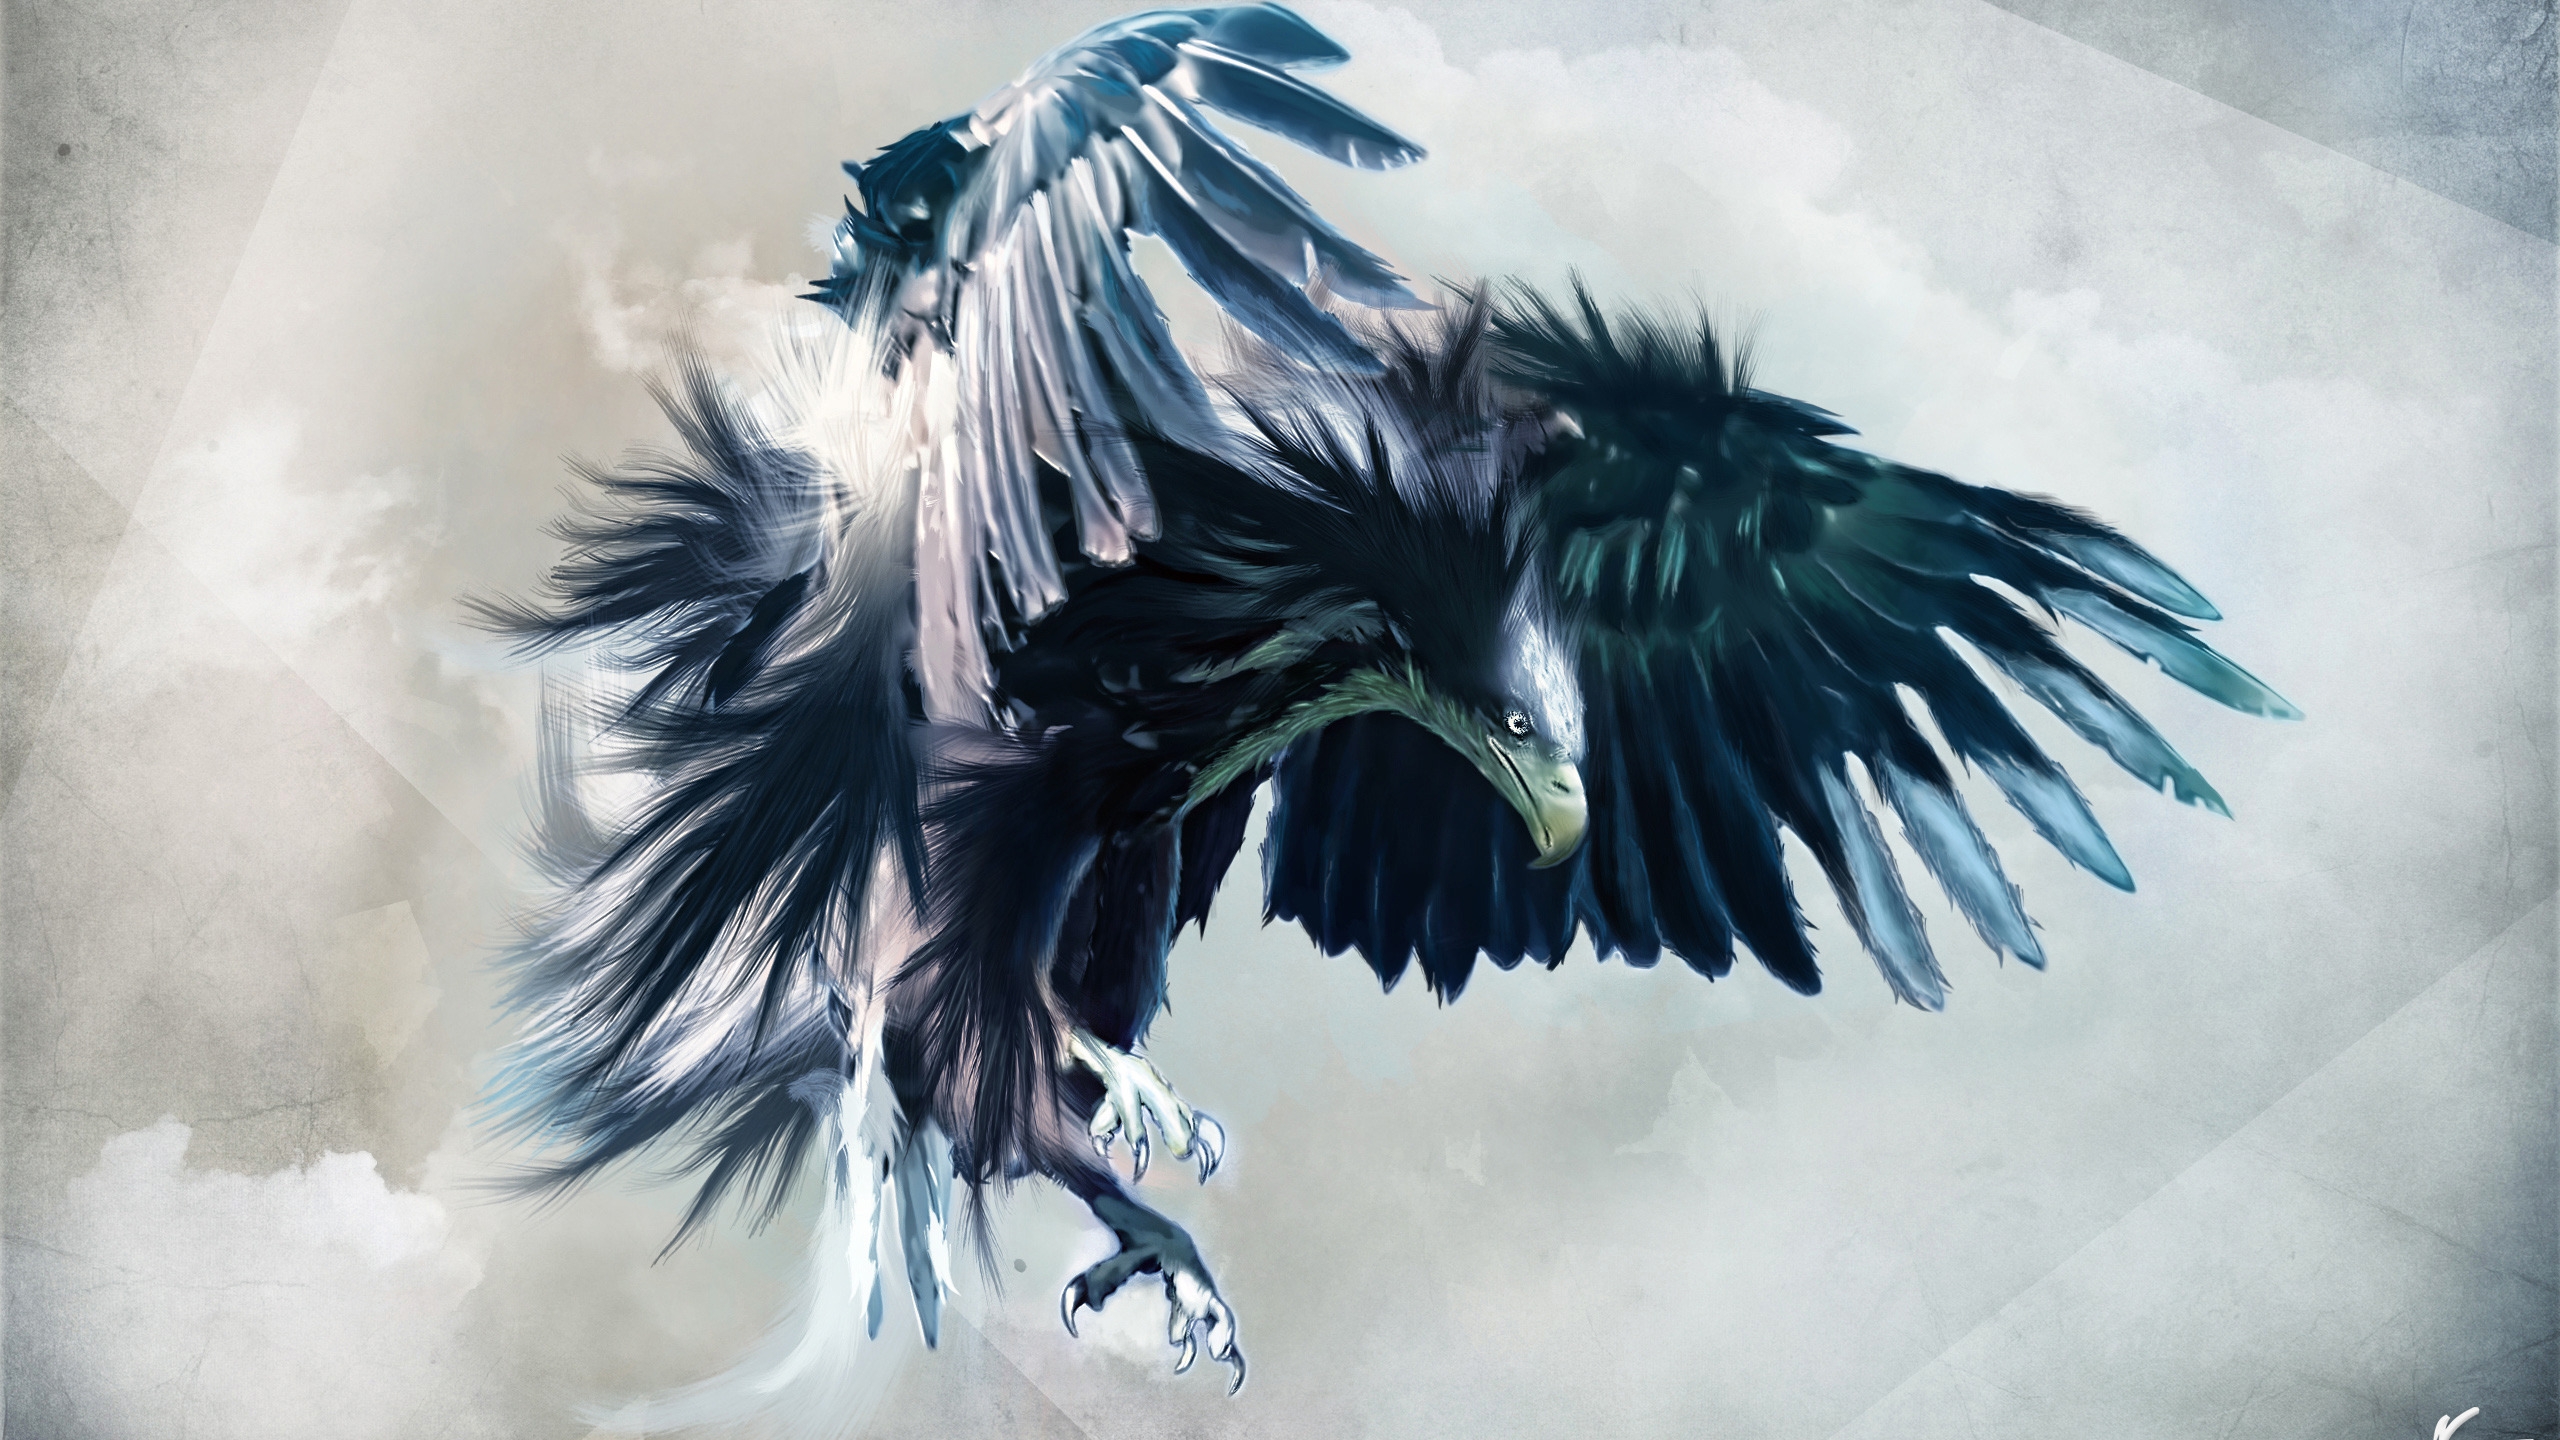 Amazing Eagle for 2560x1440 HDTV resolution